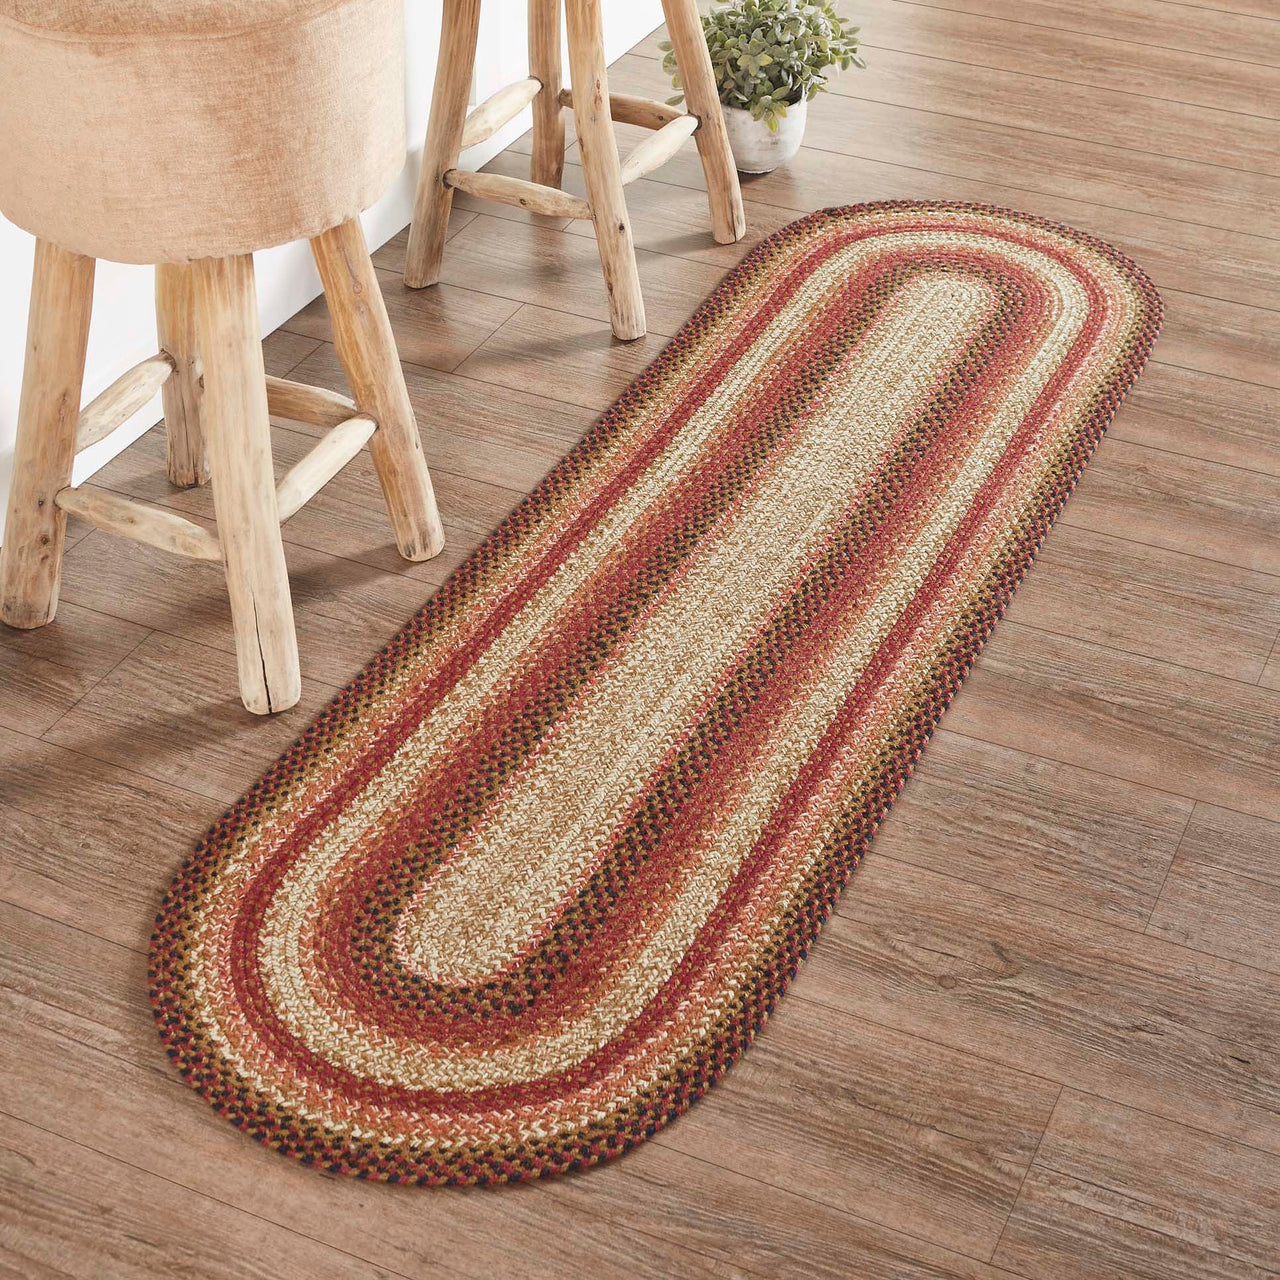 Ginger Spice Jute Braided Rug/Runner Oval with Rug Pad 22"x72" VHC Brands